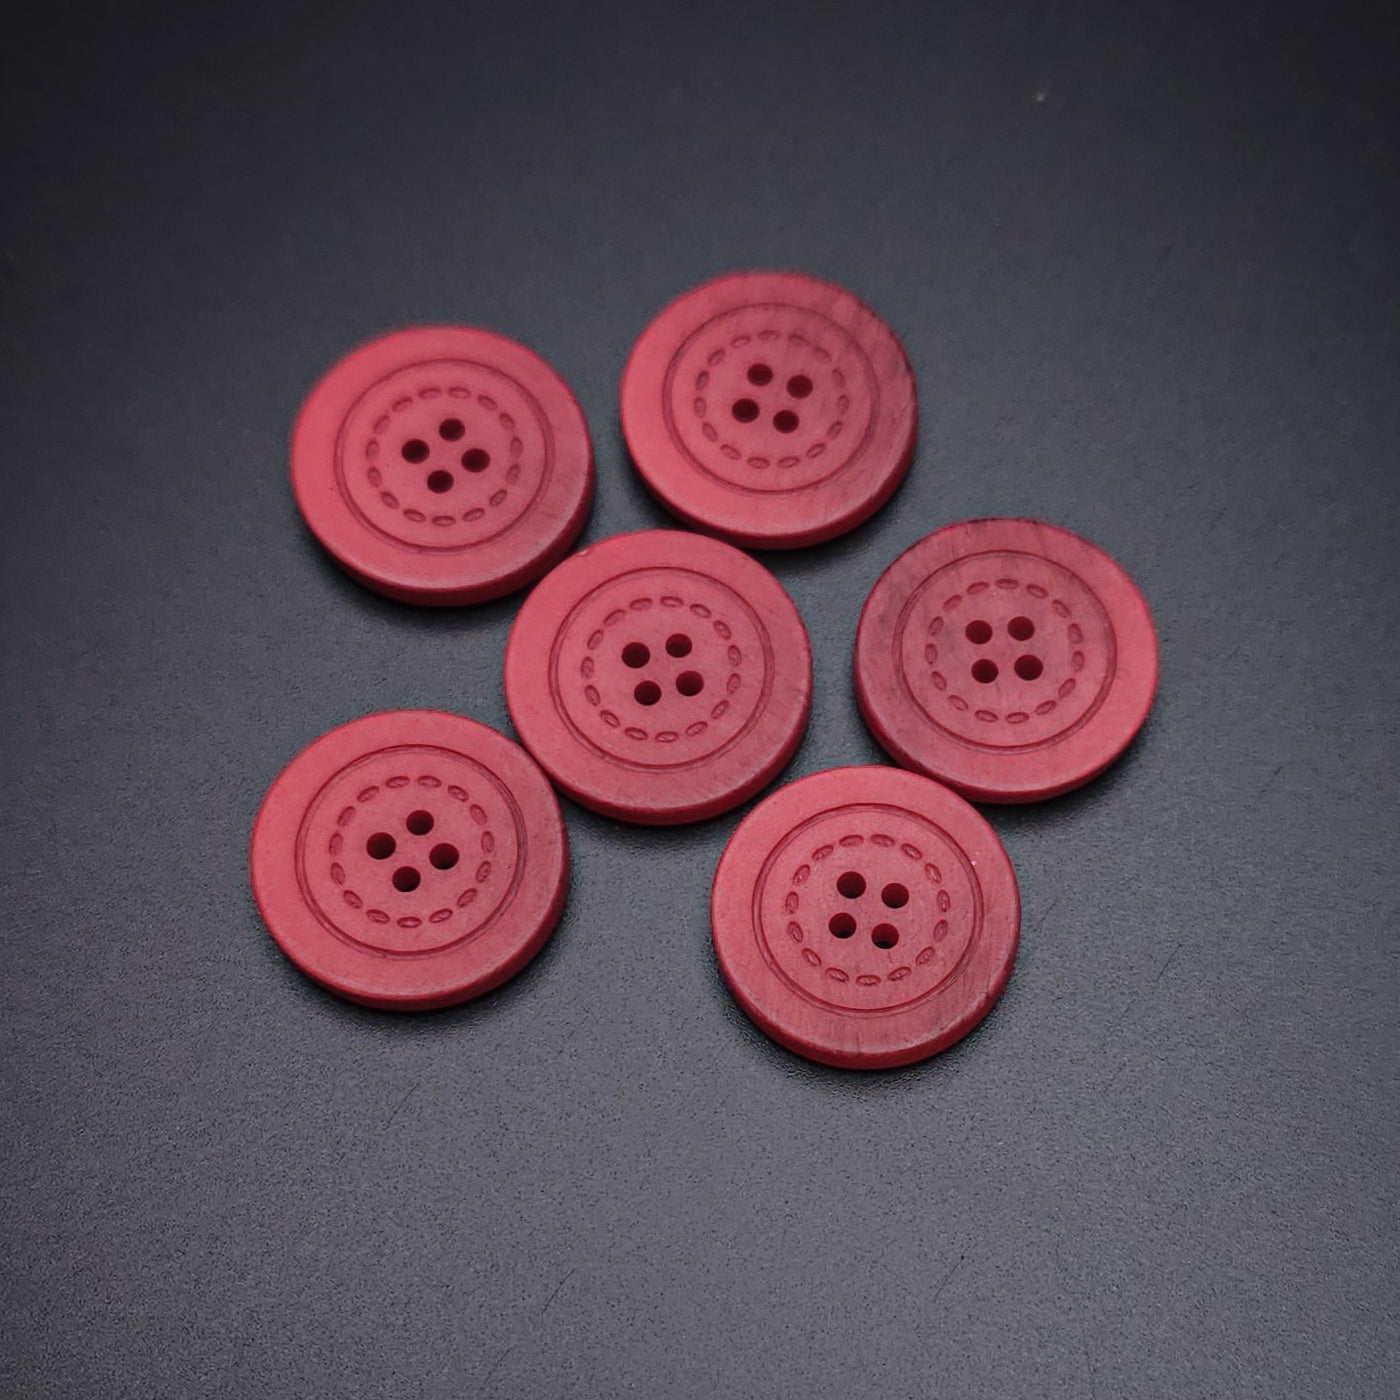 Copy of Buttons #487 - 17 mm